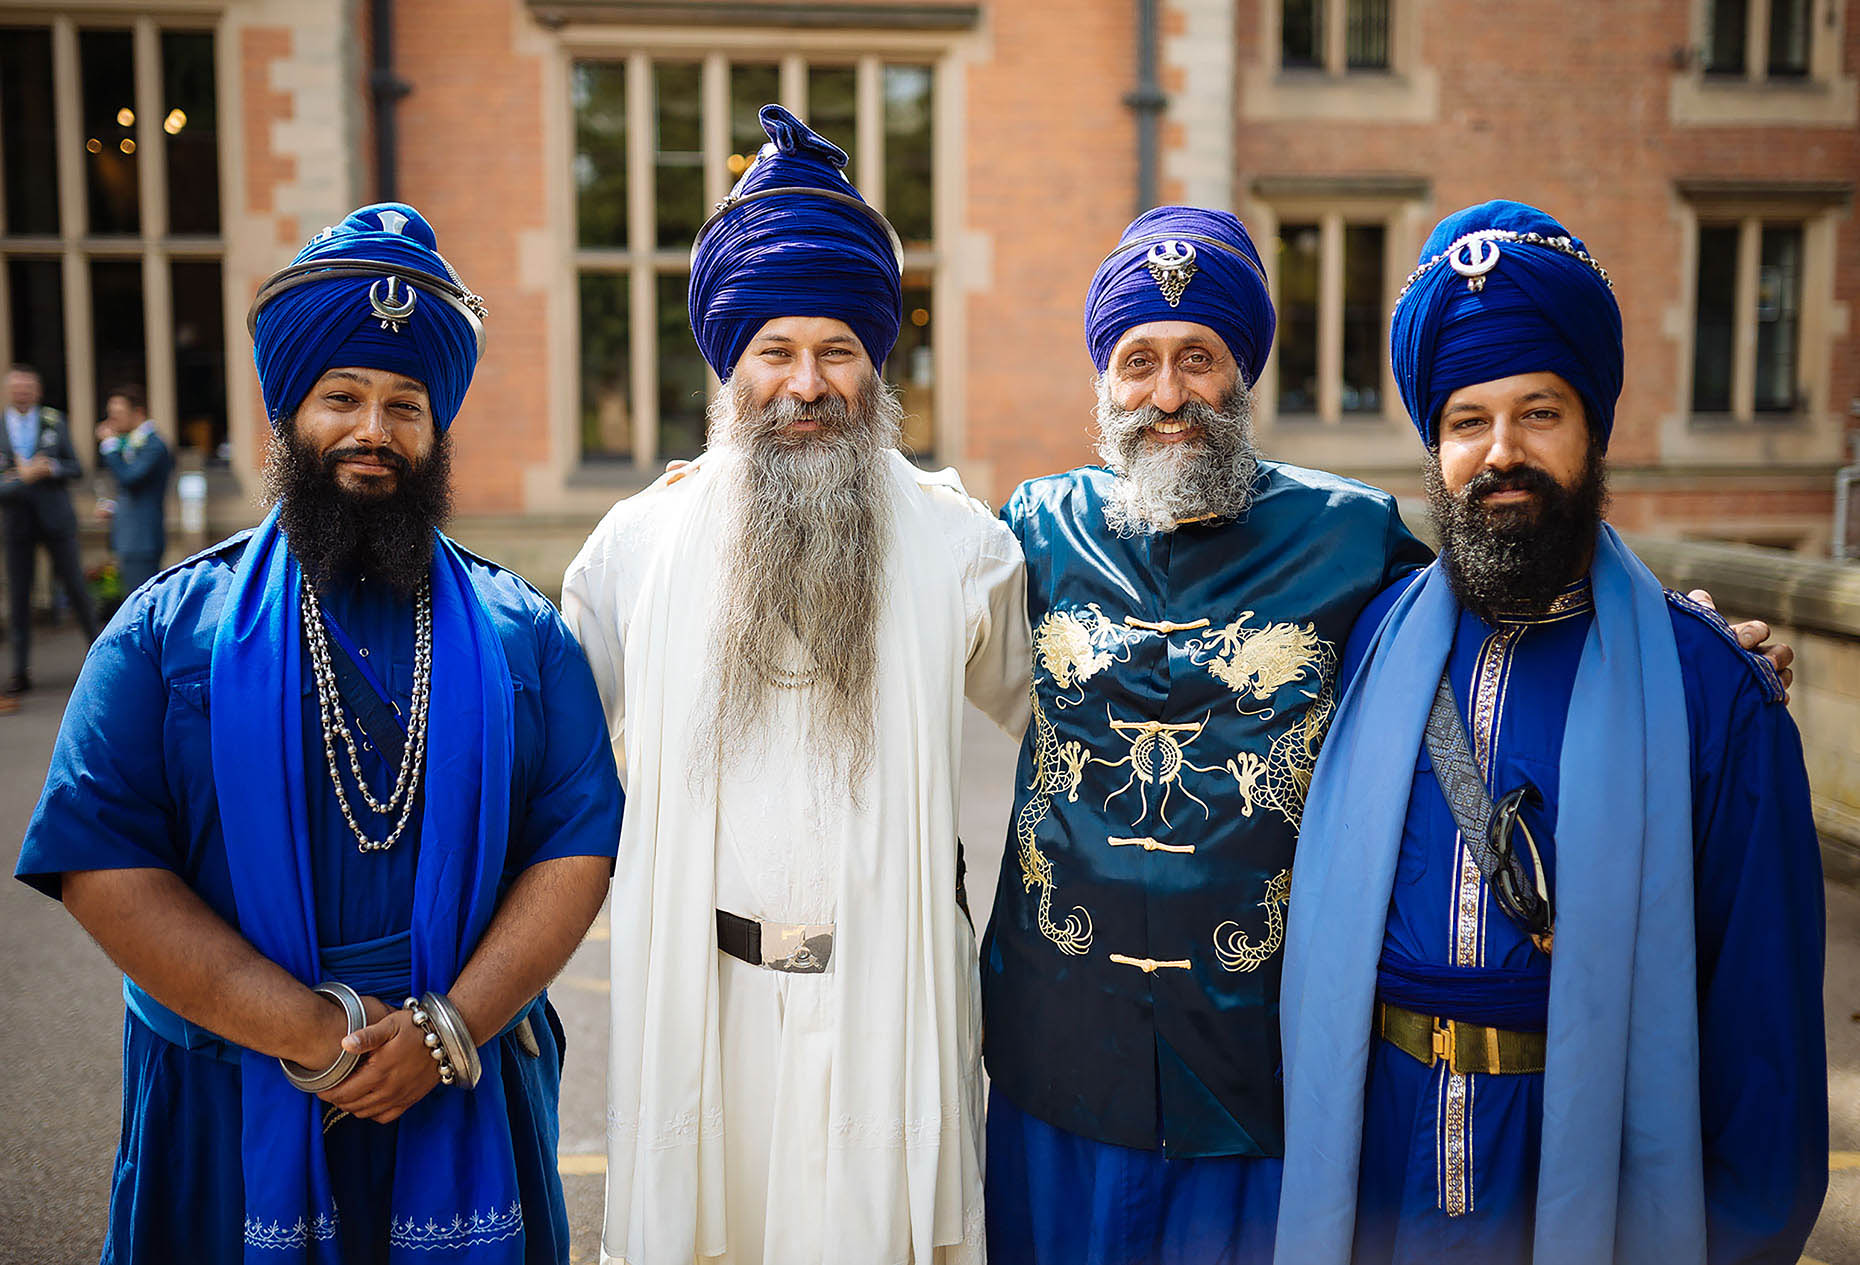 chay-felix-sikh-band-beaumanor-hall-leicestershire-wedding-photography-19